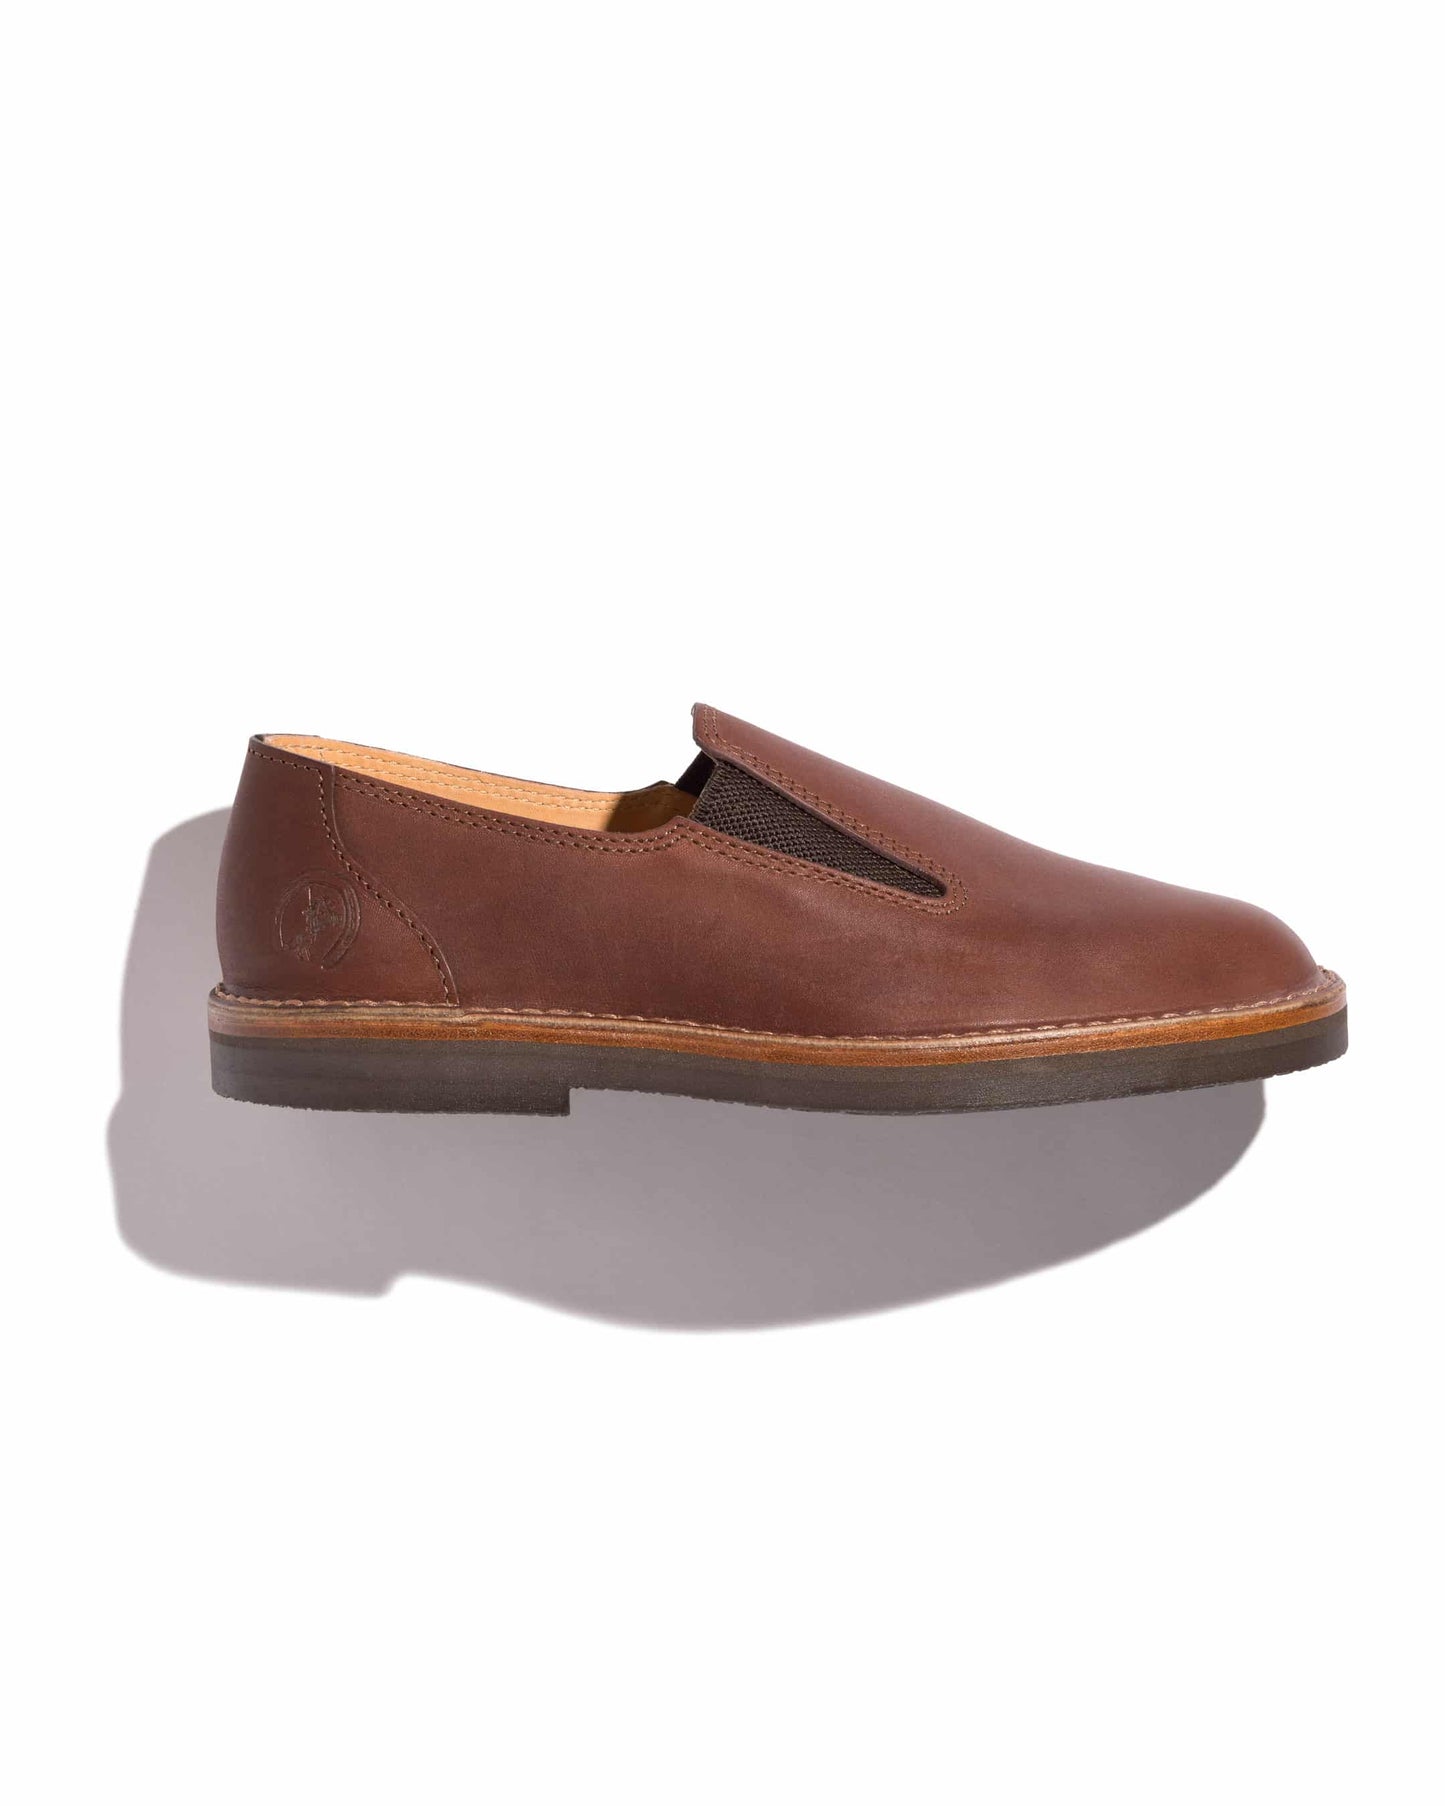 Brown oiled leather slip-on